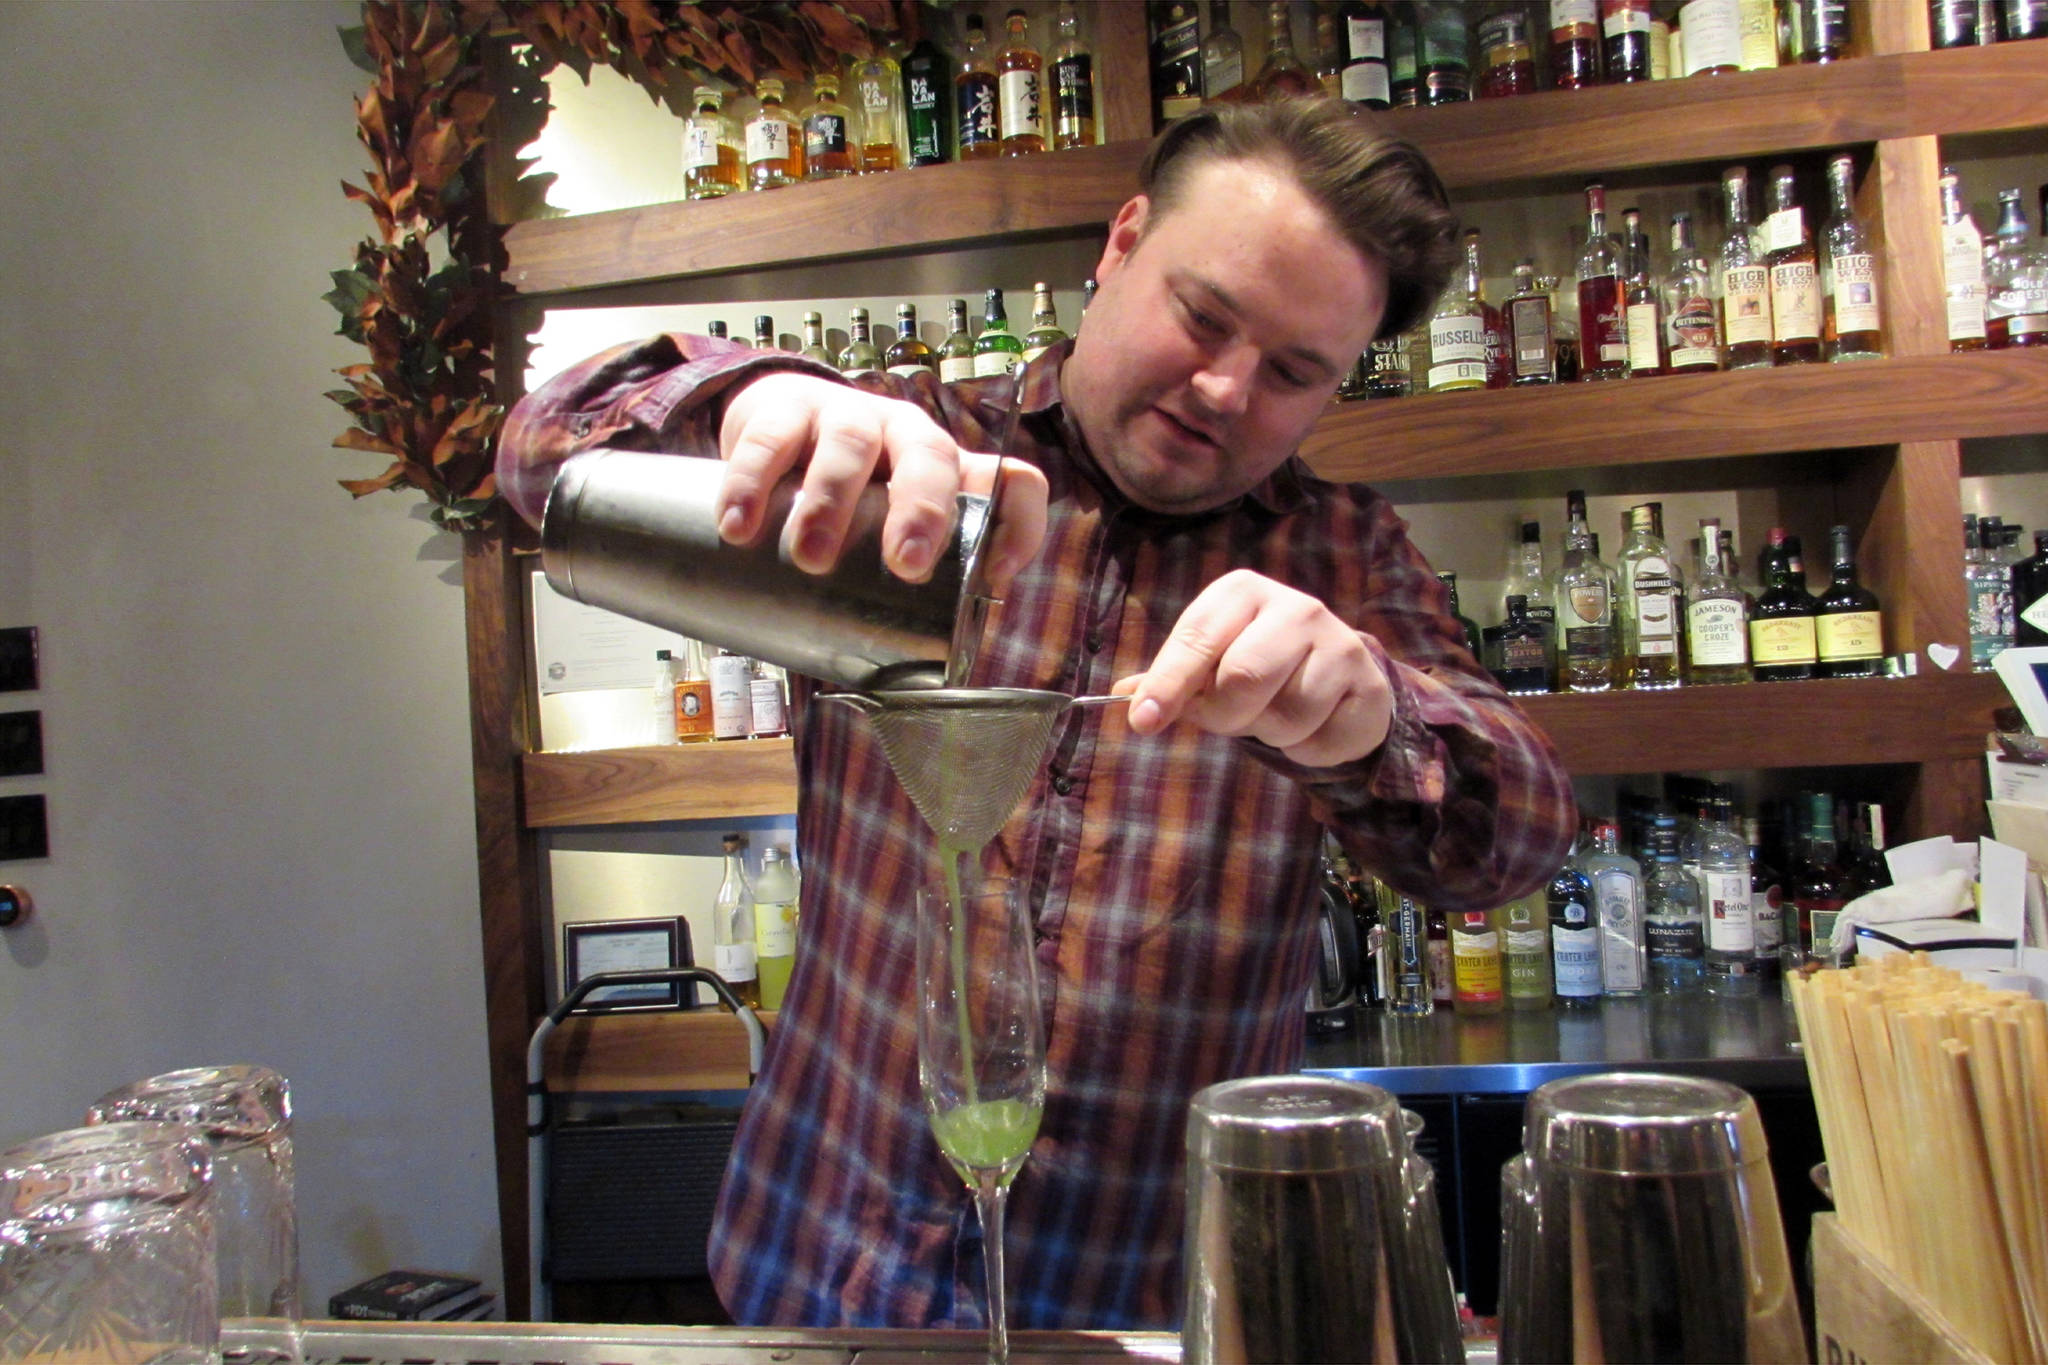 Jared Curé whips up a Garden Medley, a nonalcoholic mocktail, the Narrows Bar has on its menu for Sobriety Awareness Month, Tuesday, March 12. The drink was developed for a partnership with Recover Alaska. (Ben Hohenstatt | Juneau Empire)